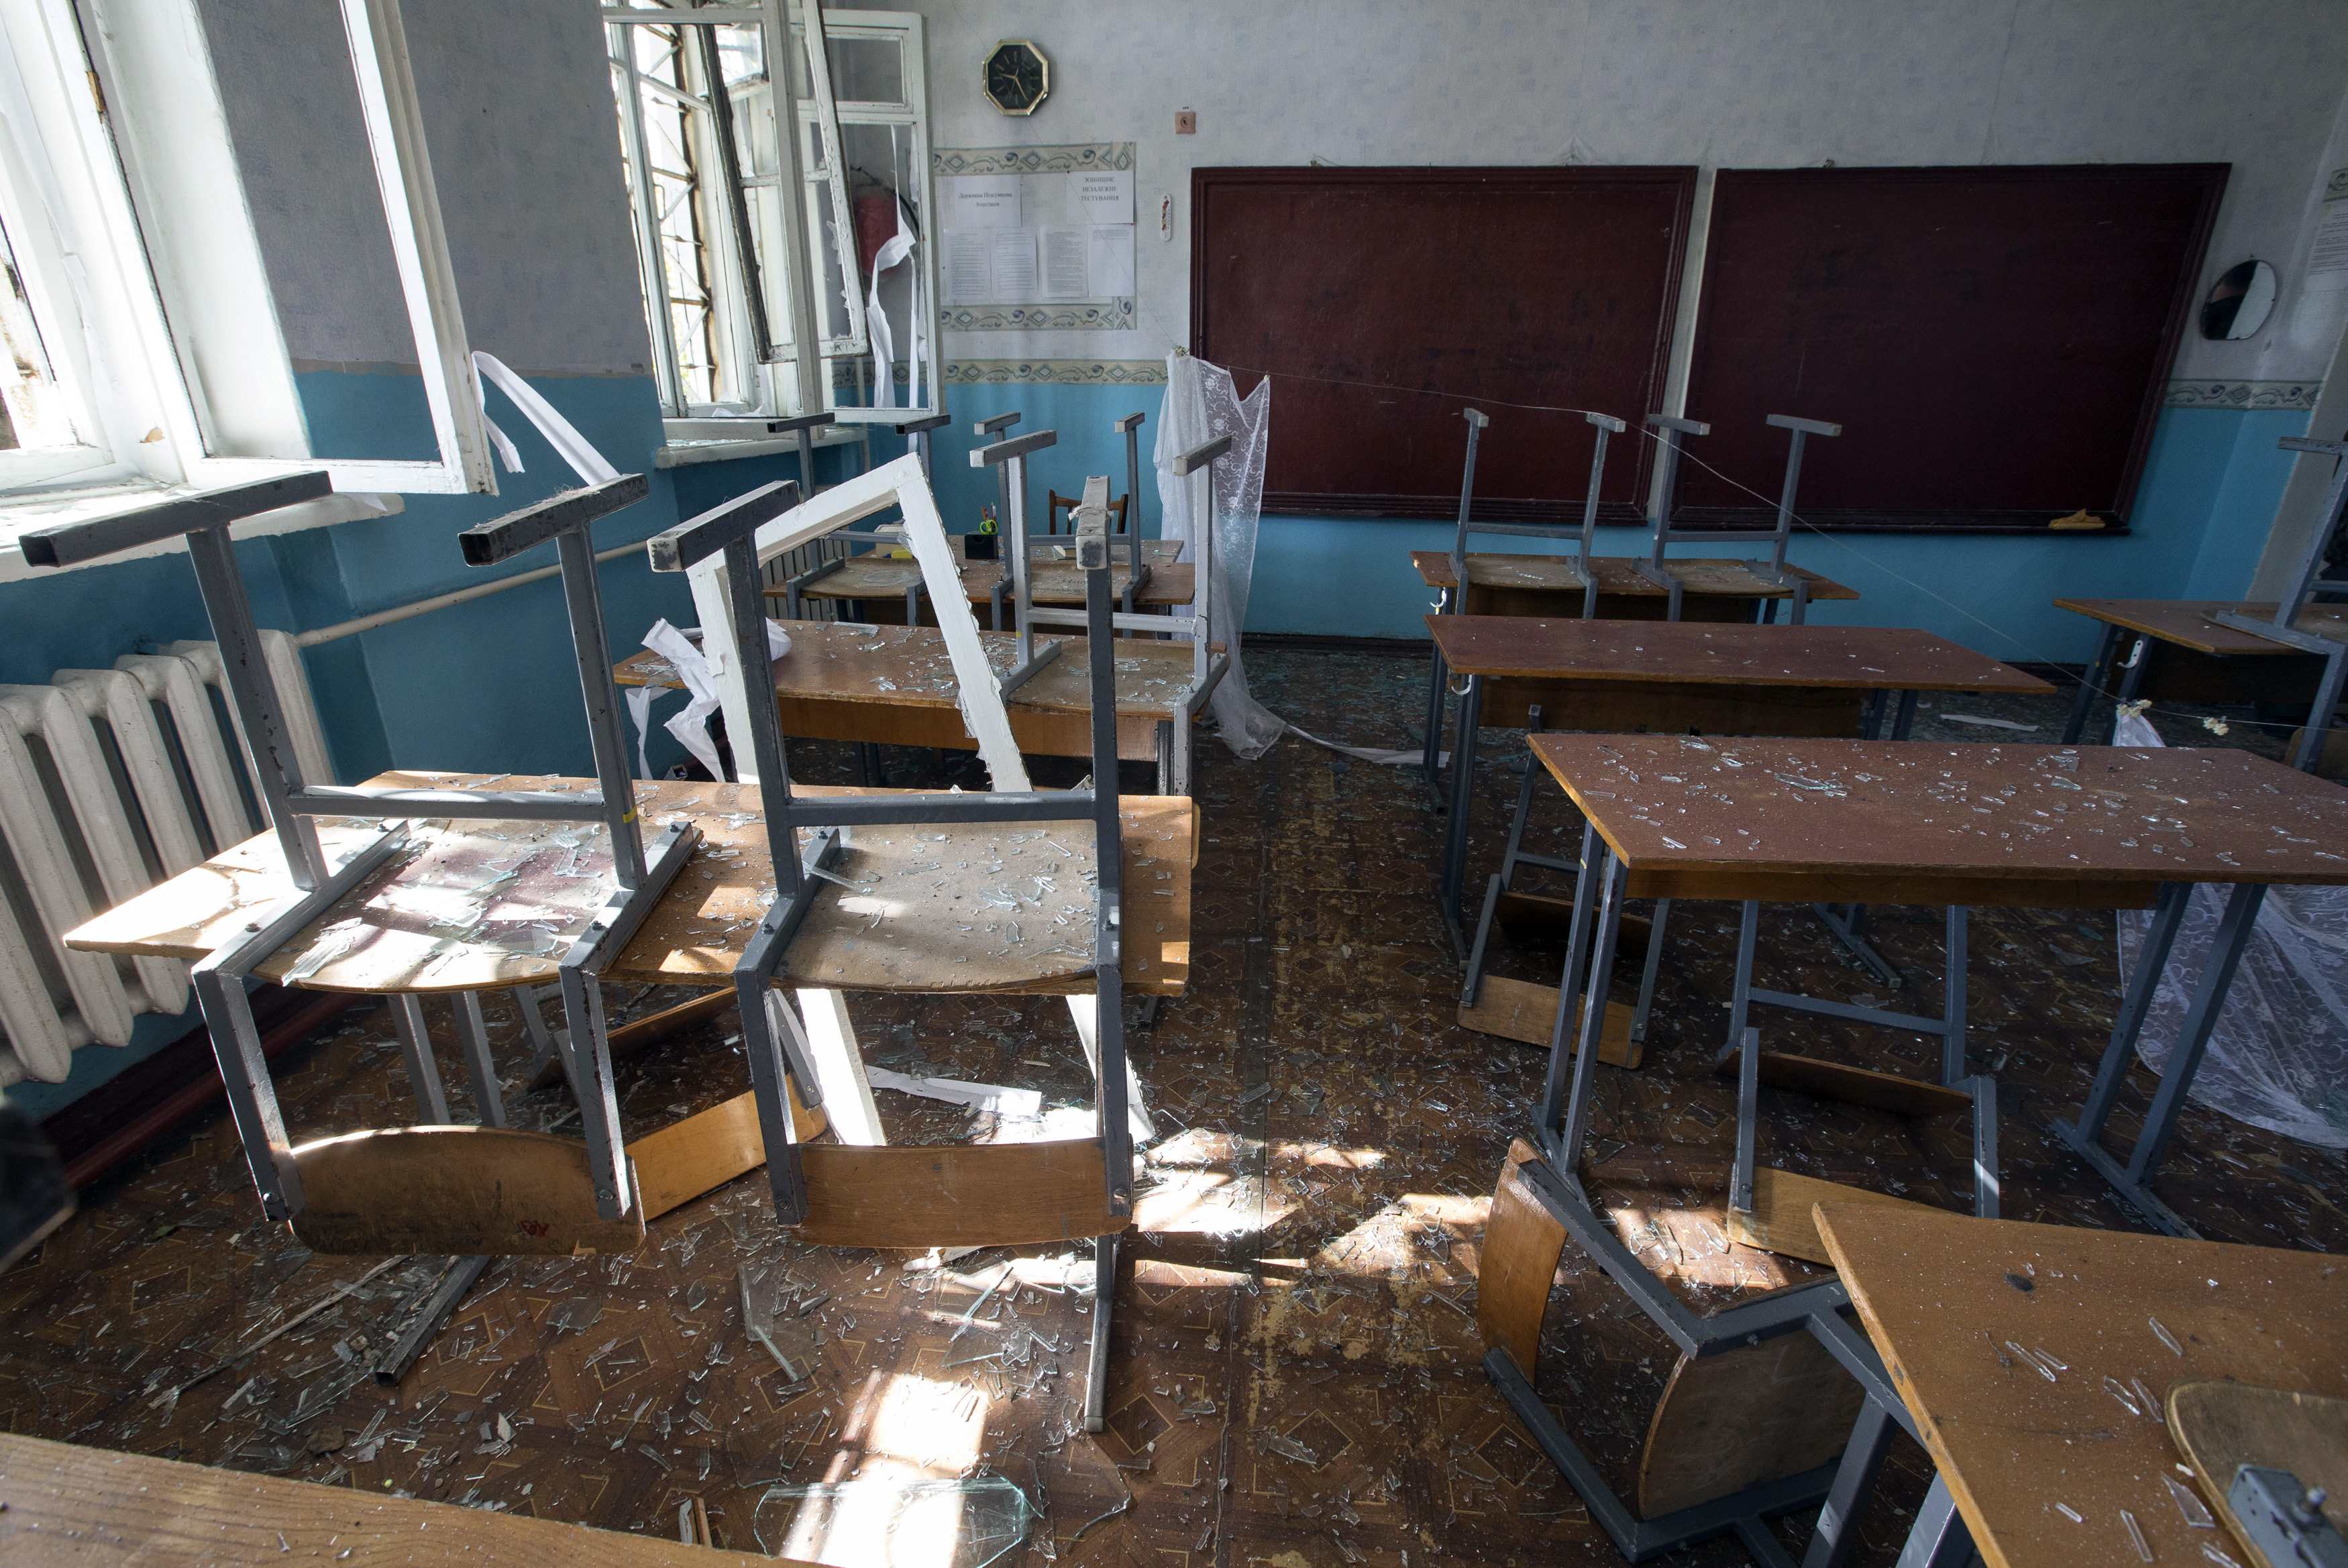 At Least 10 People Killed in Shelling on and near School in East Ukraine